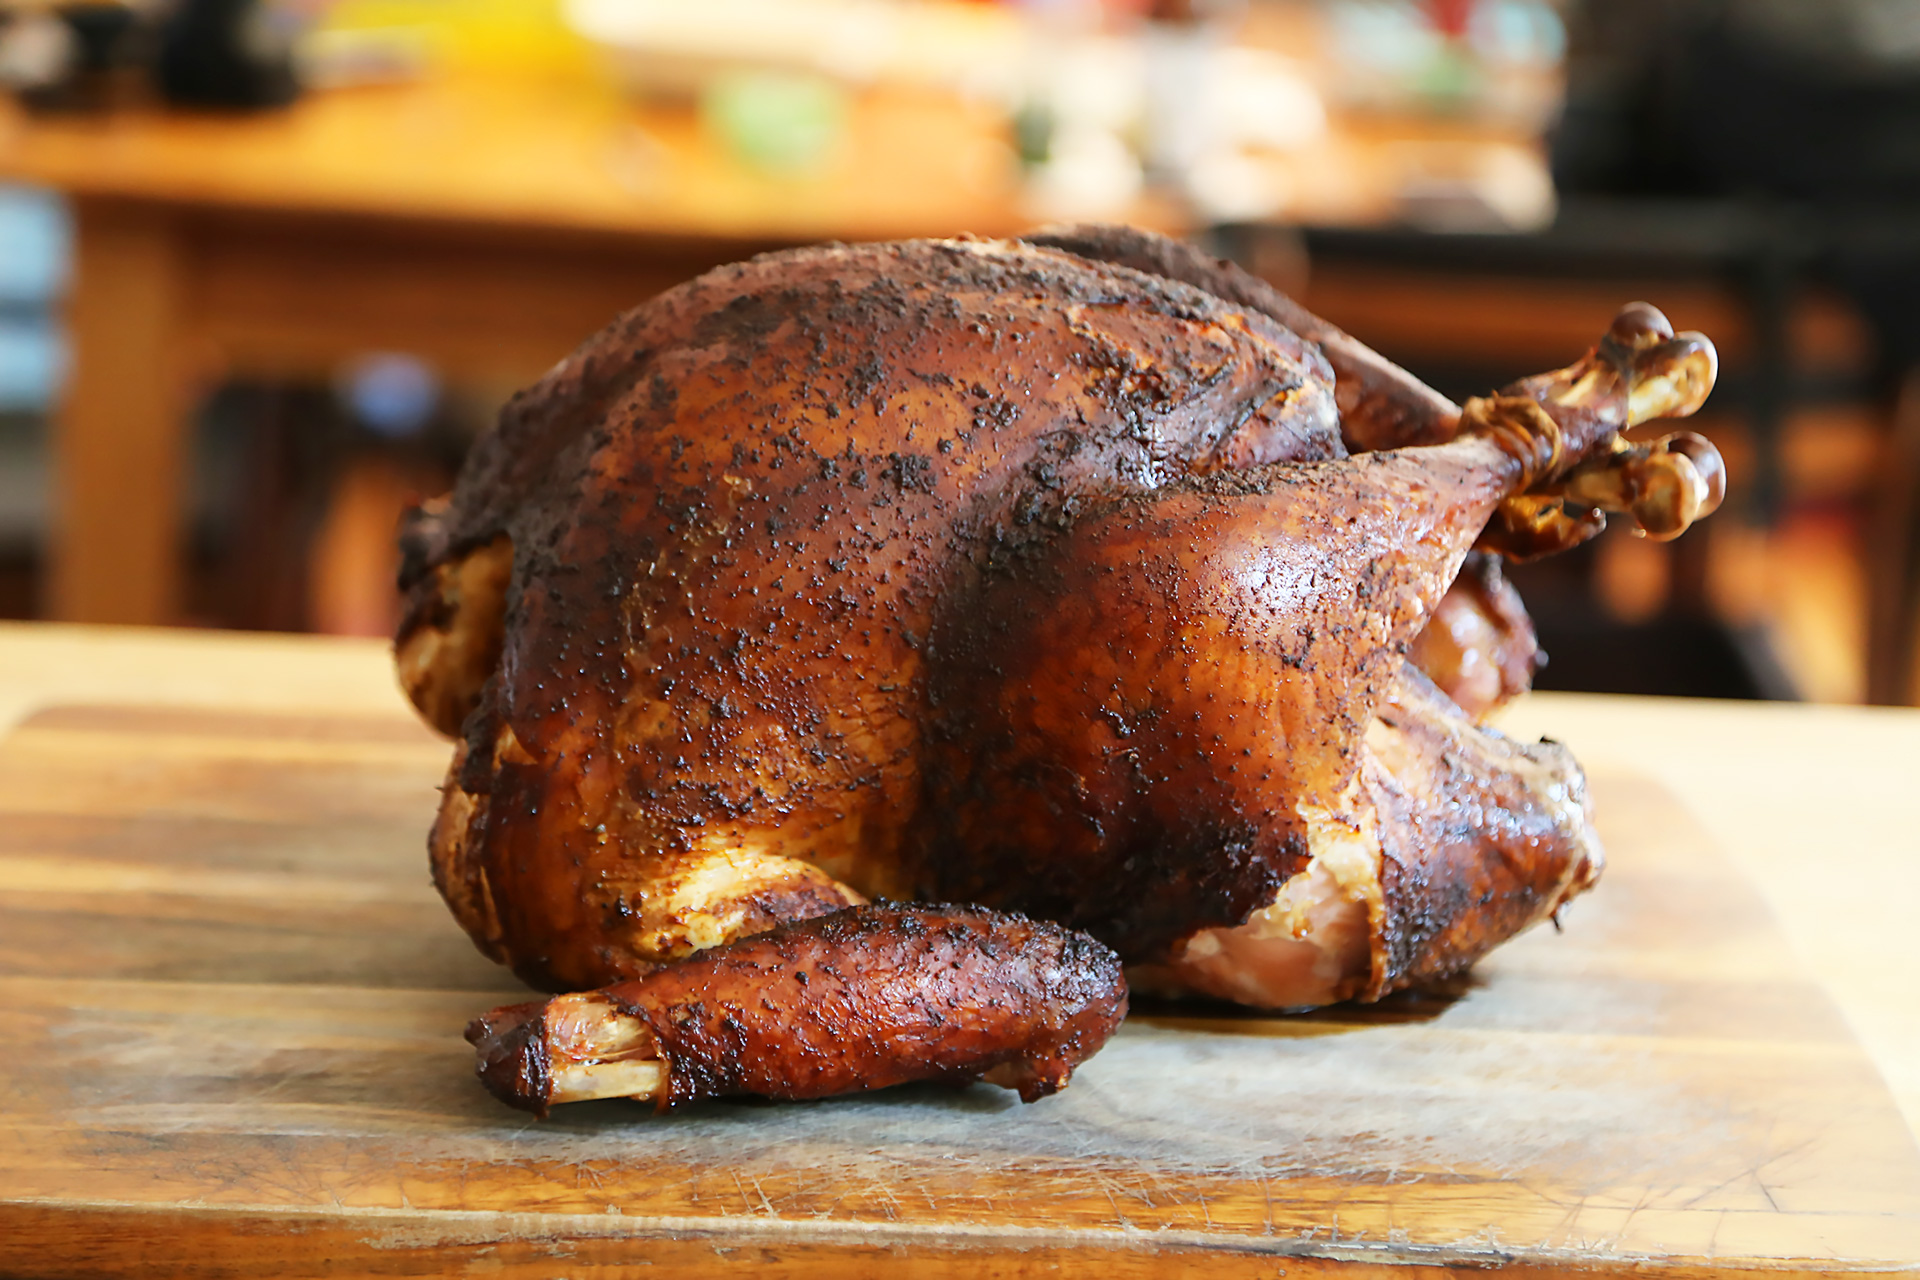 Remove the turkey from the grill and transfer to a large platter. Let rest for about 15 minutes.